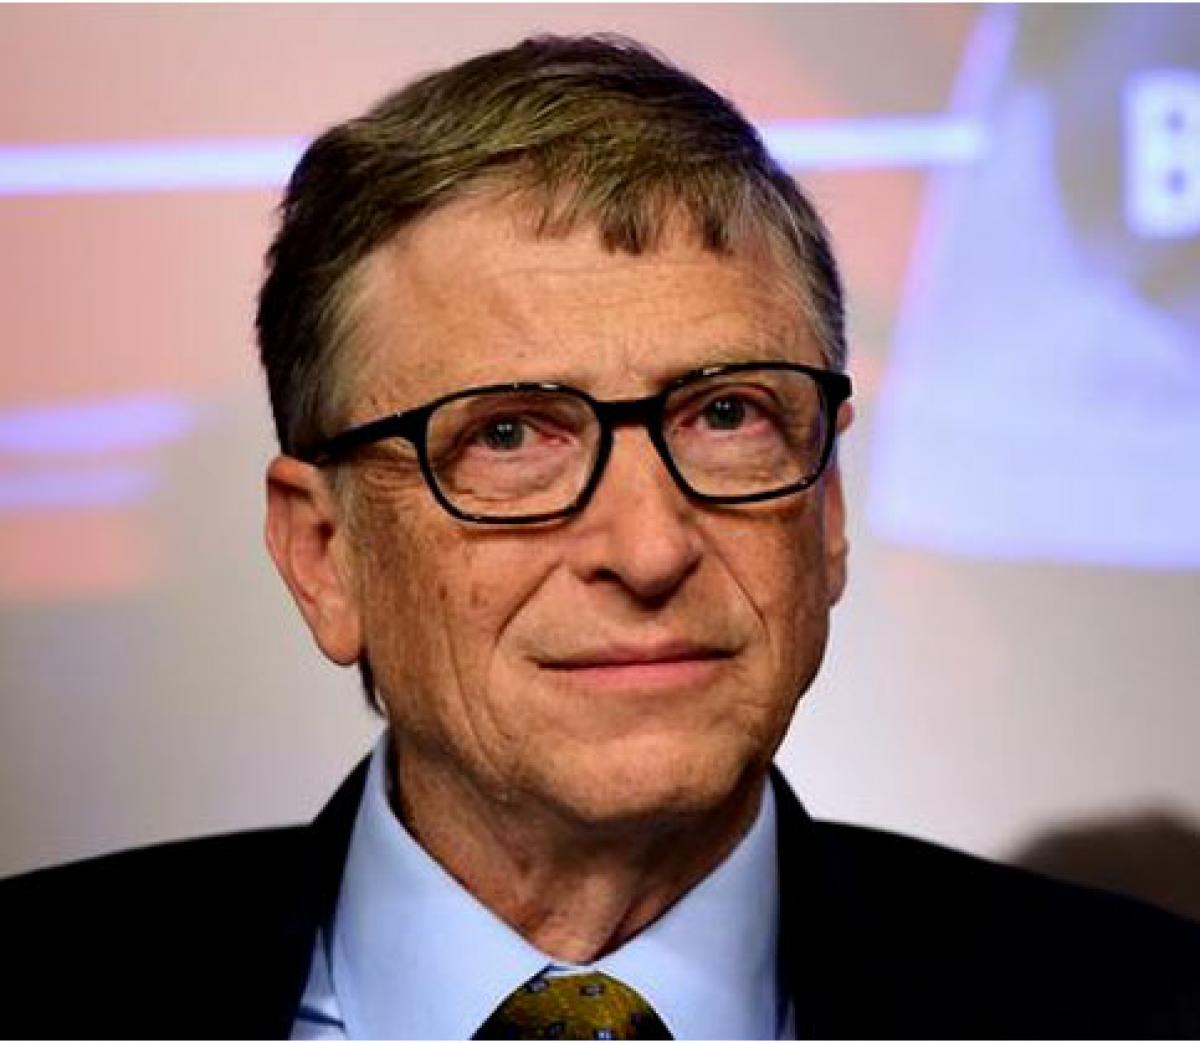 Bill Gates tops Forbes list of Americas richie rich